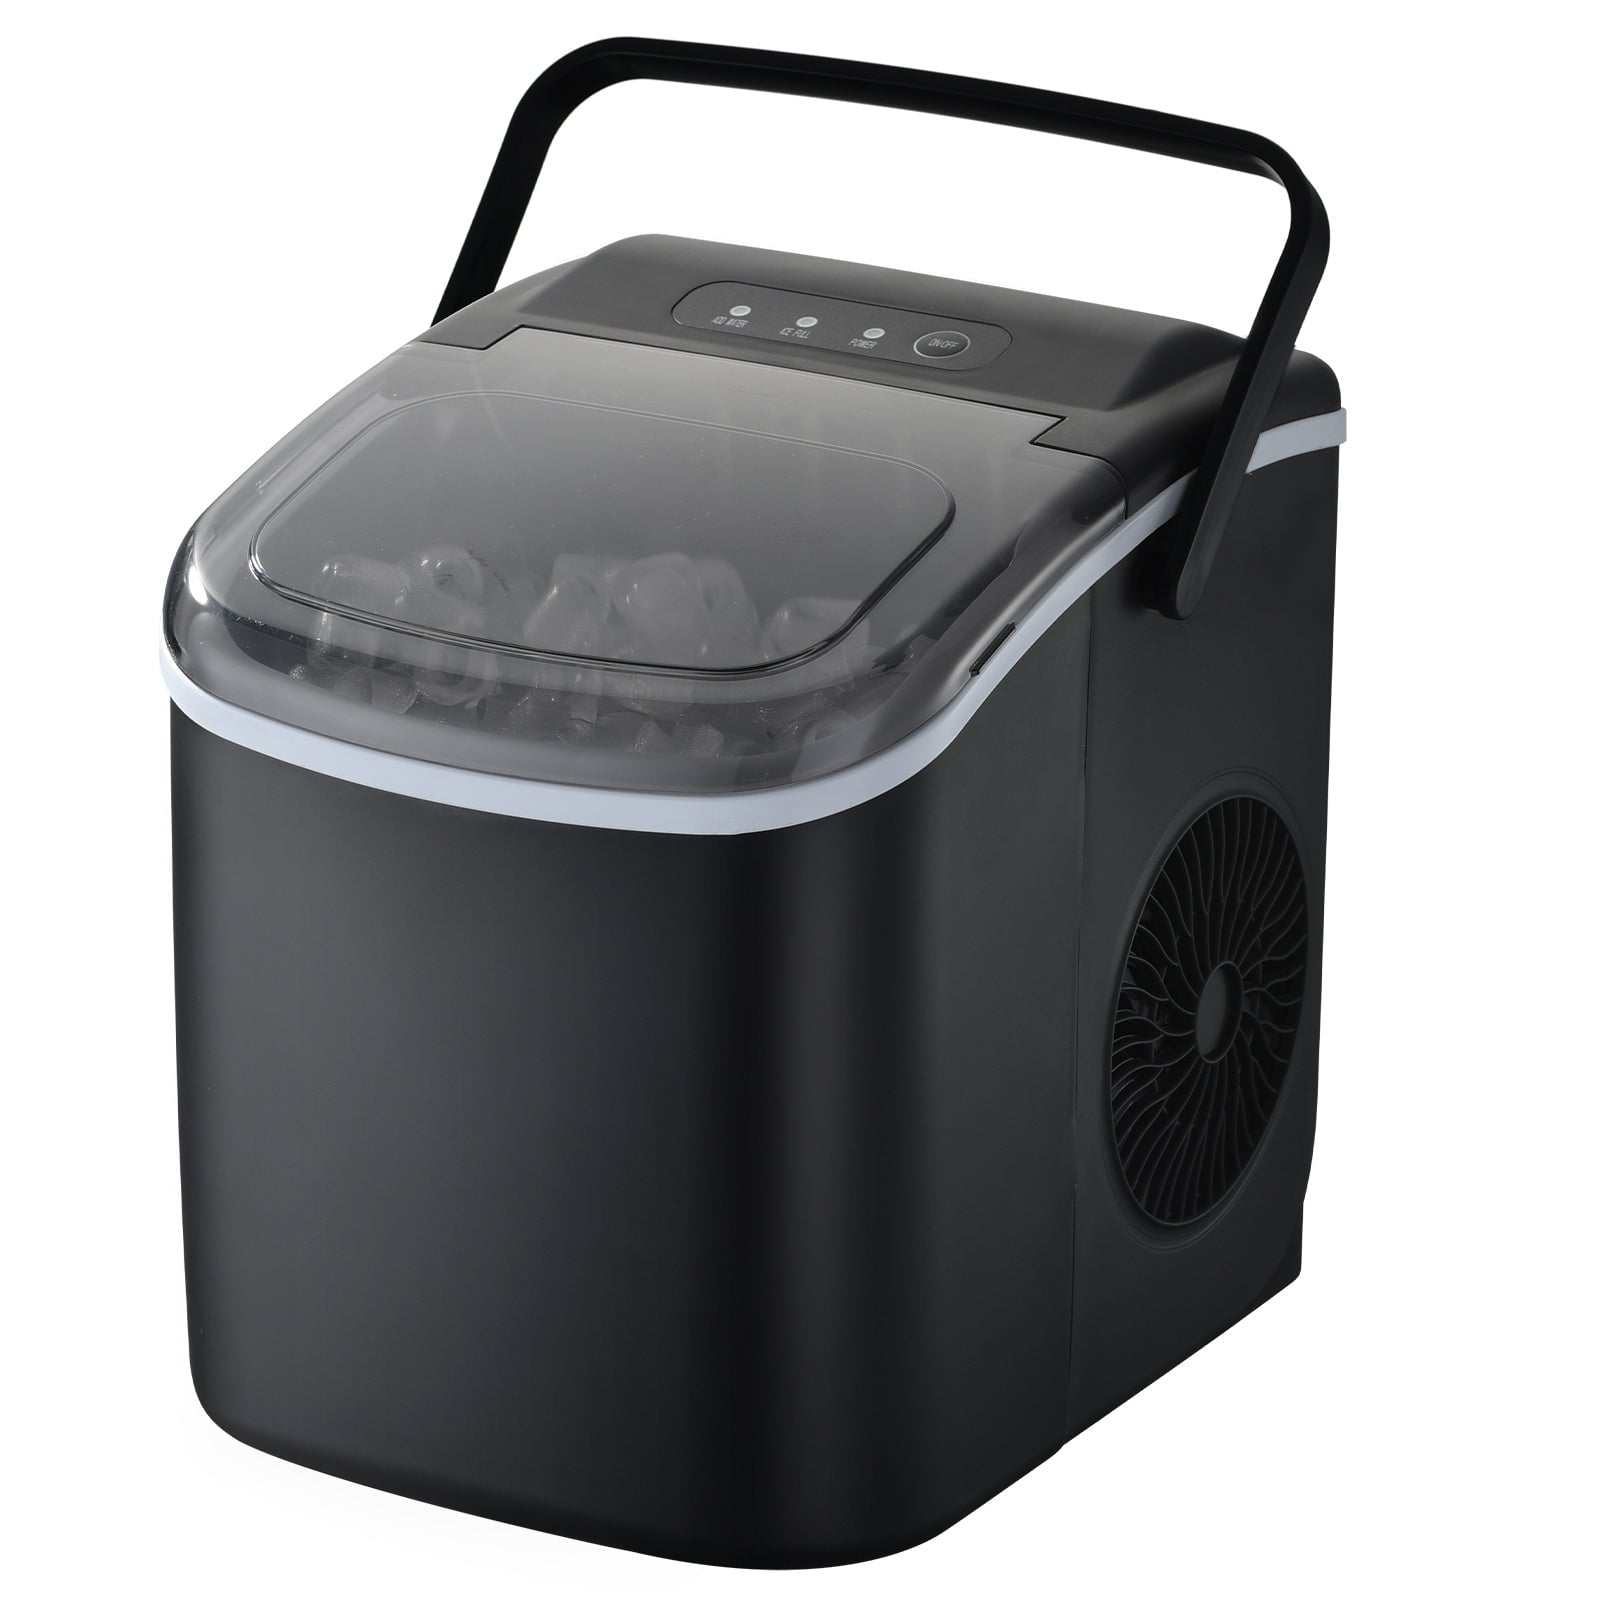 COWSAR 26 lb. lb. Daily Production Bullet Clear Ice Portable Ice Maker Finish: Black ZCO5822G-BLACK